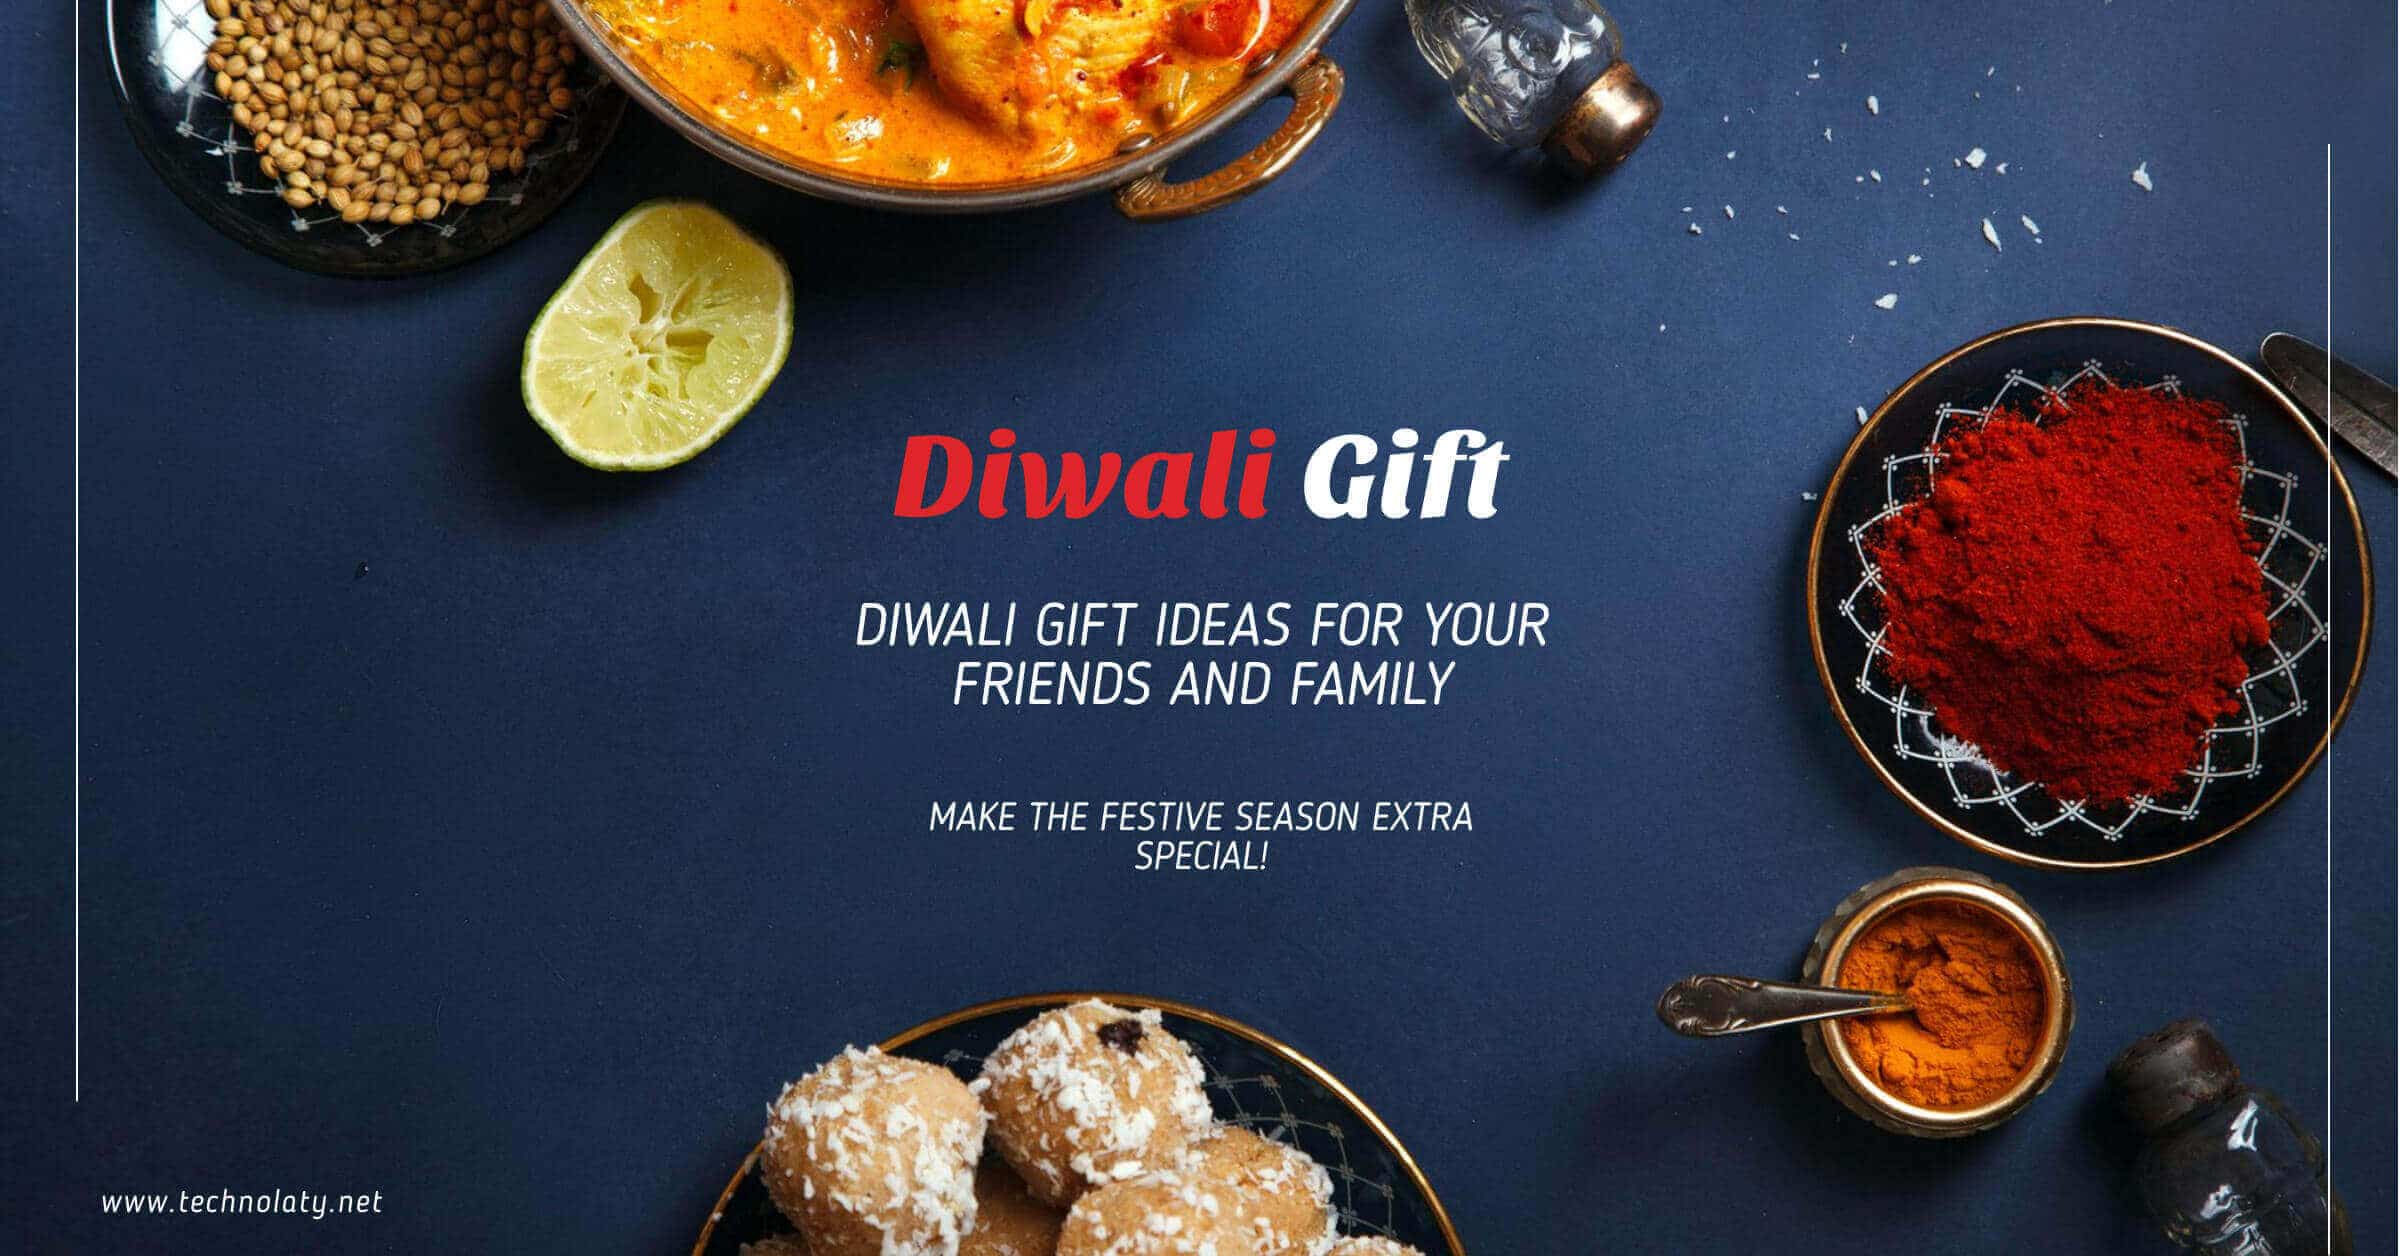 Diwali Gift Ideas For Your Friends And Family